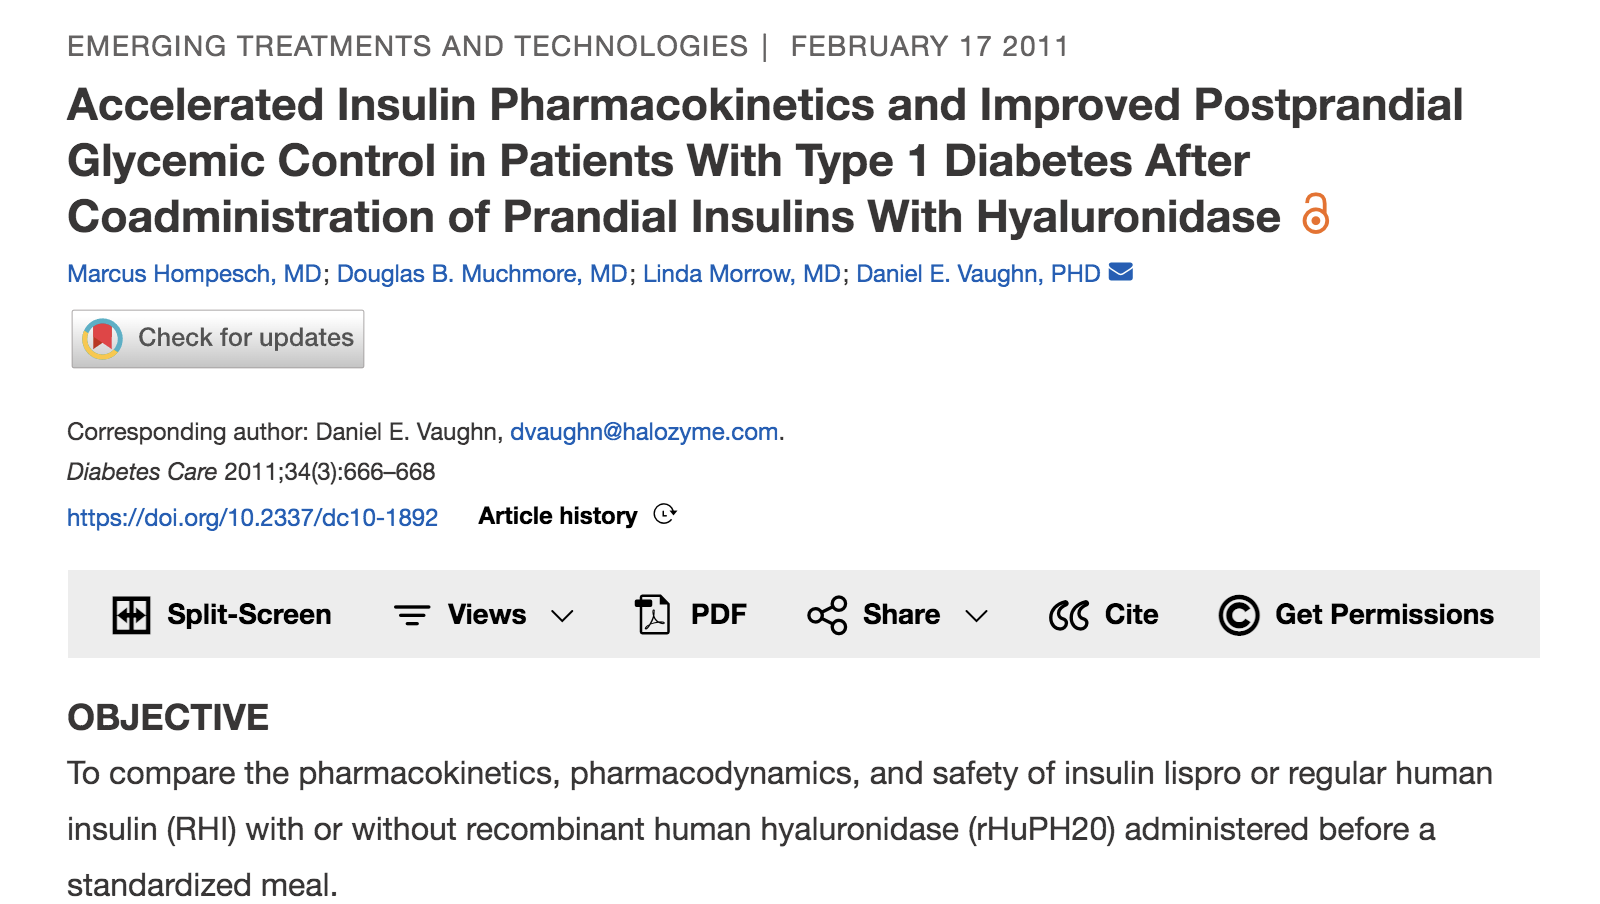 image of Accelerated insulin pharmacokinetics and improved postprandial glycemic control in patients with type 1 diabetes after coadministration of prandial insulins with hyaluronidase